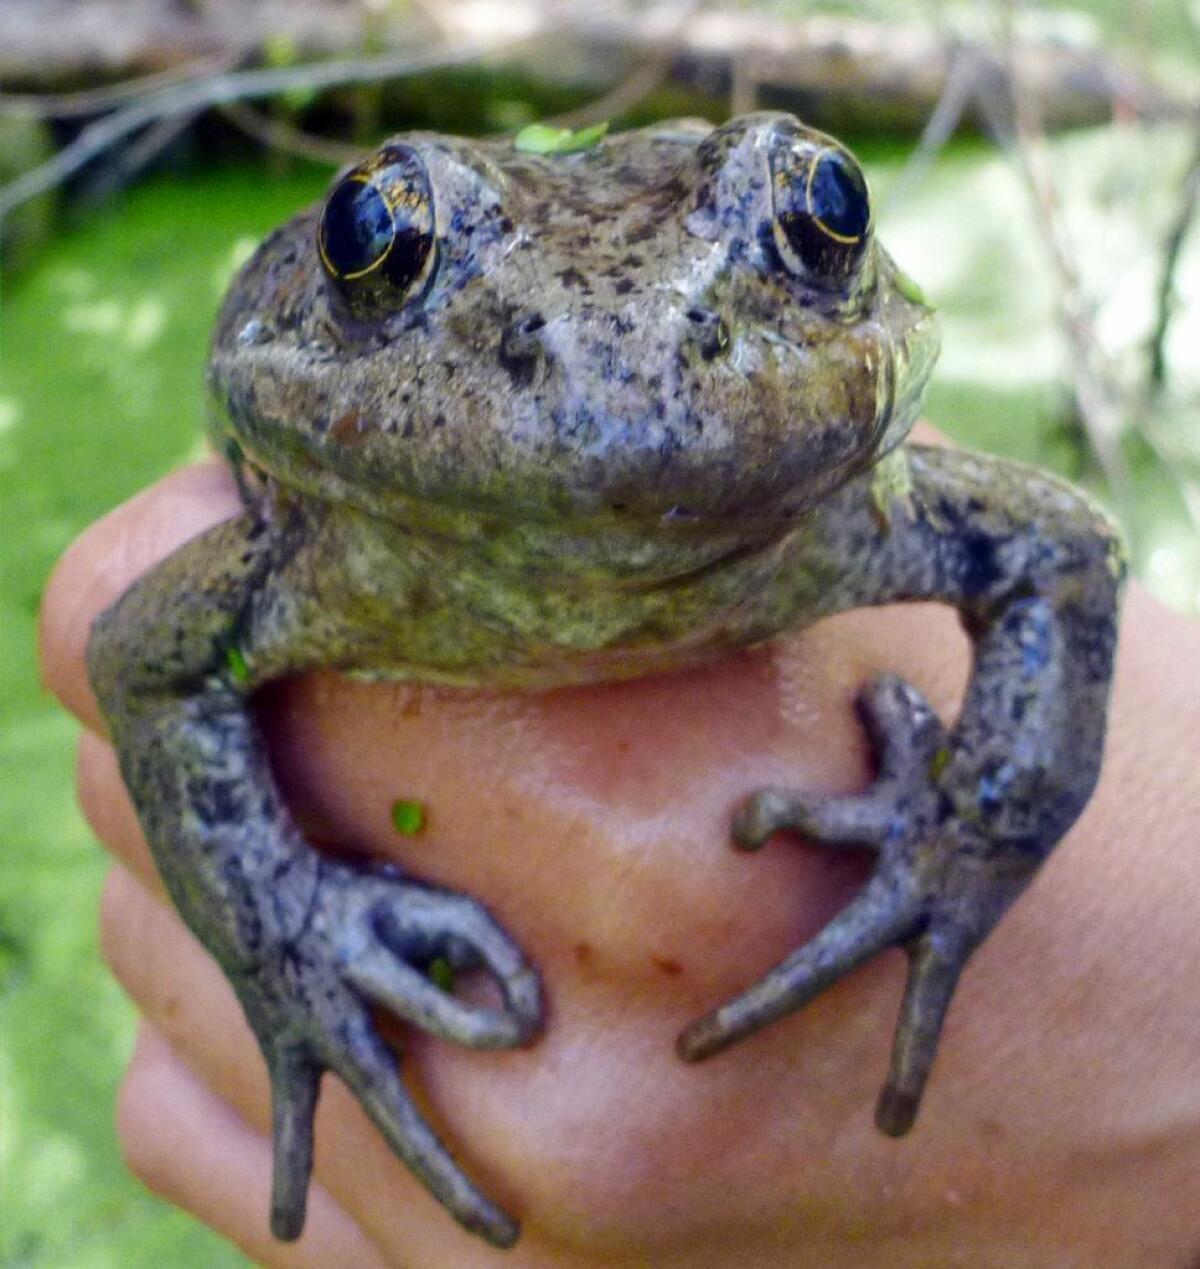 A California red-legged frog found in the Santa Monica Mountains near Los Angeles in 2017.